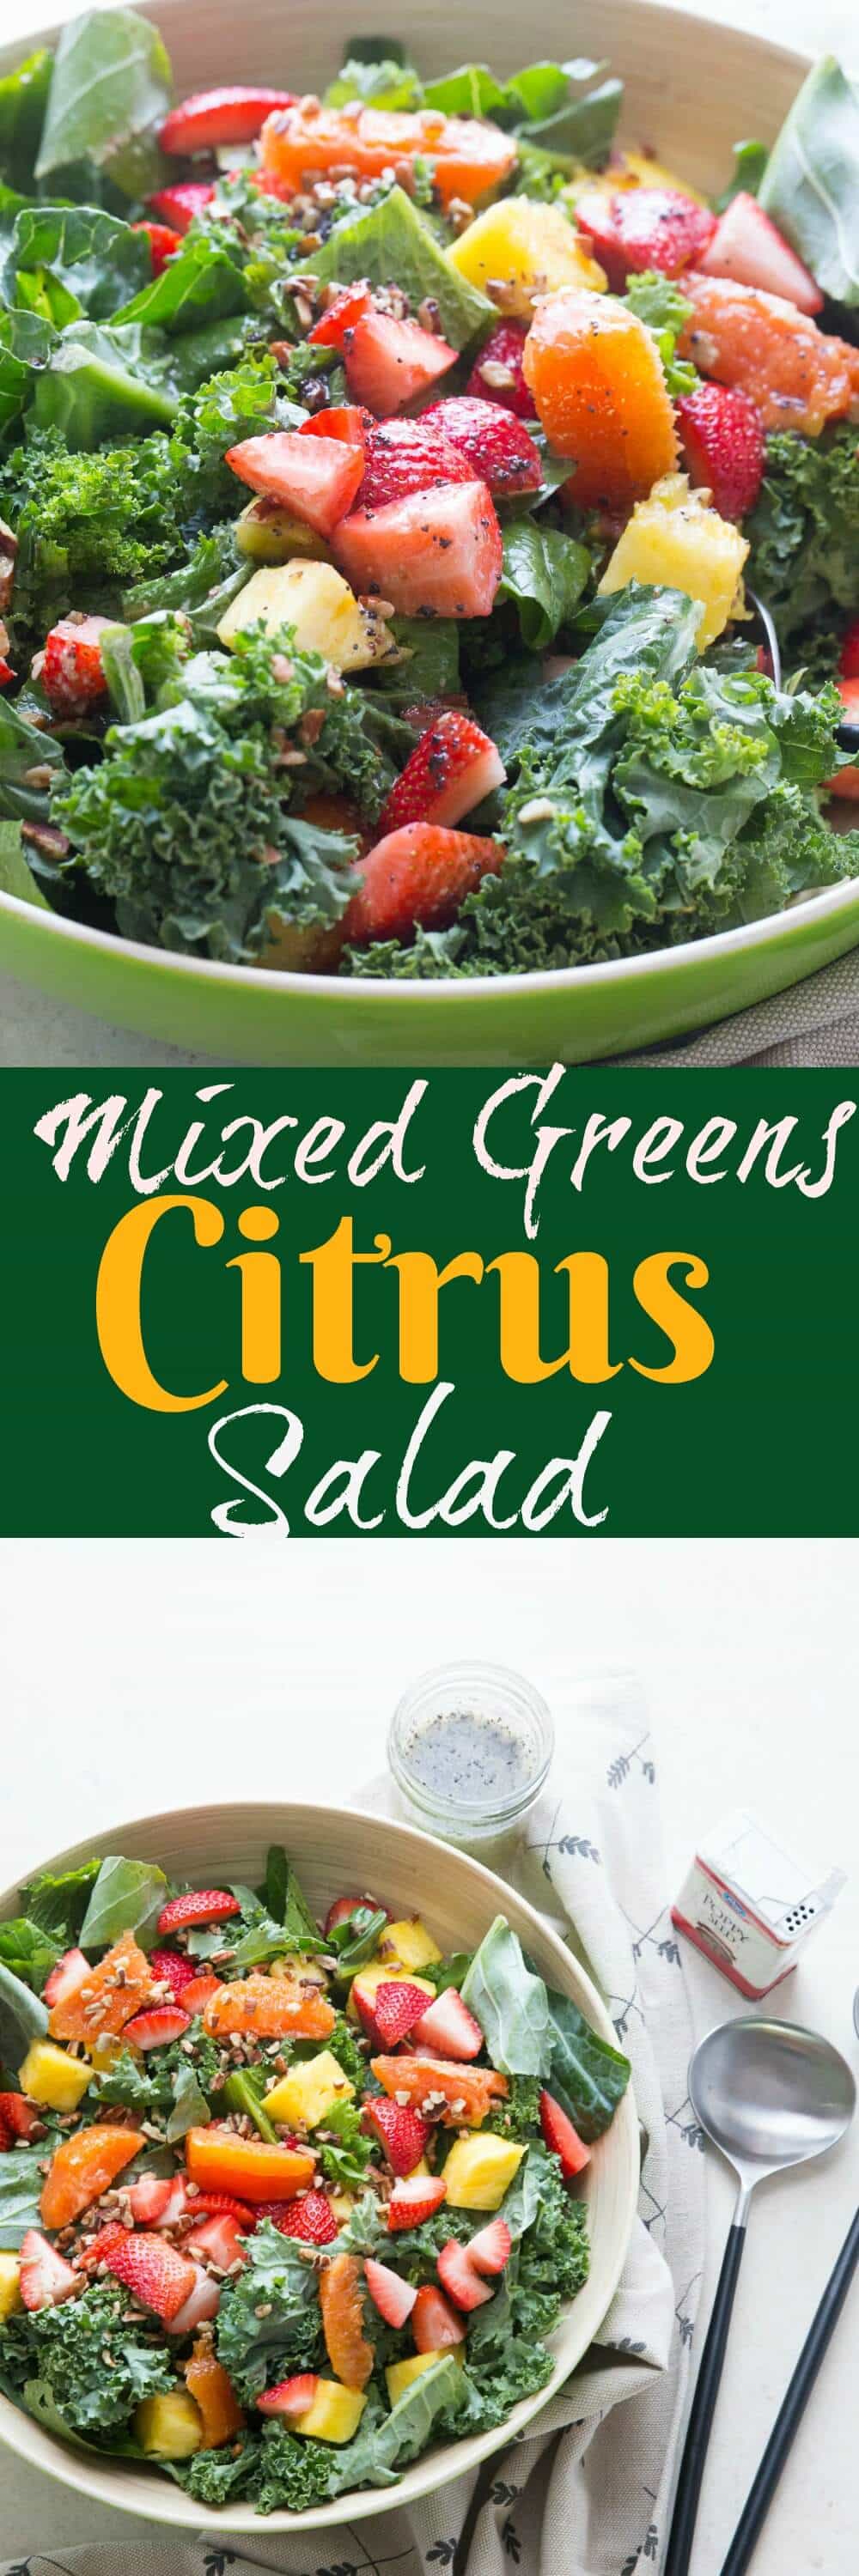 This citrus salad is full of goodness! A variety of sturdy greens and lots of colorful, ripe, fresh fruits. The poppyseed dressing pulls it all together!